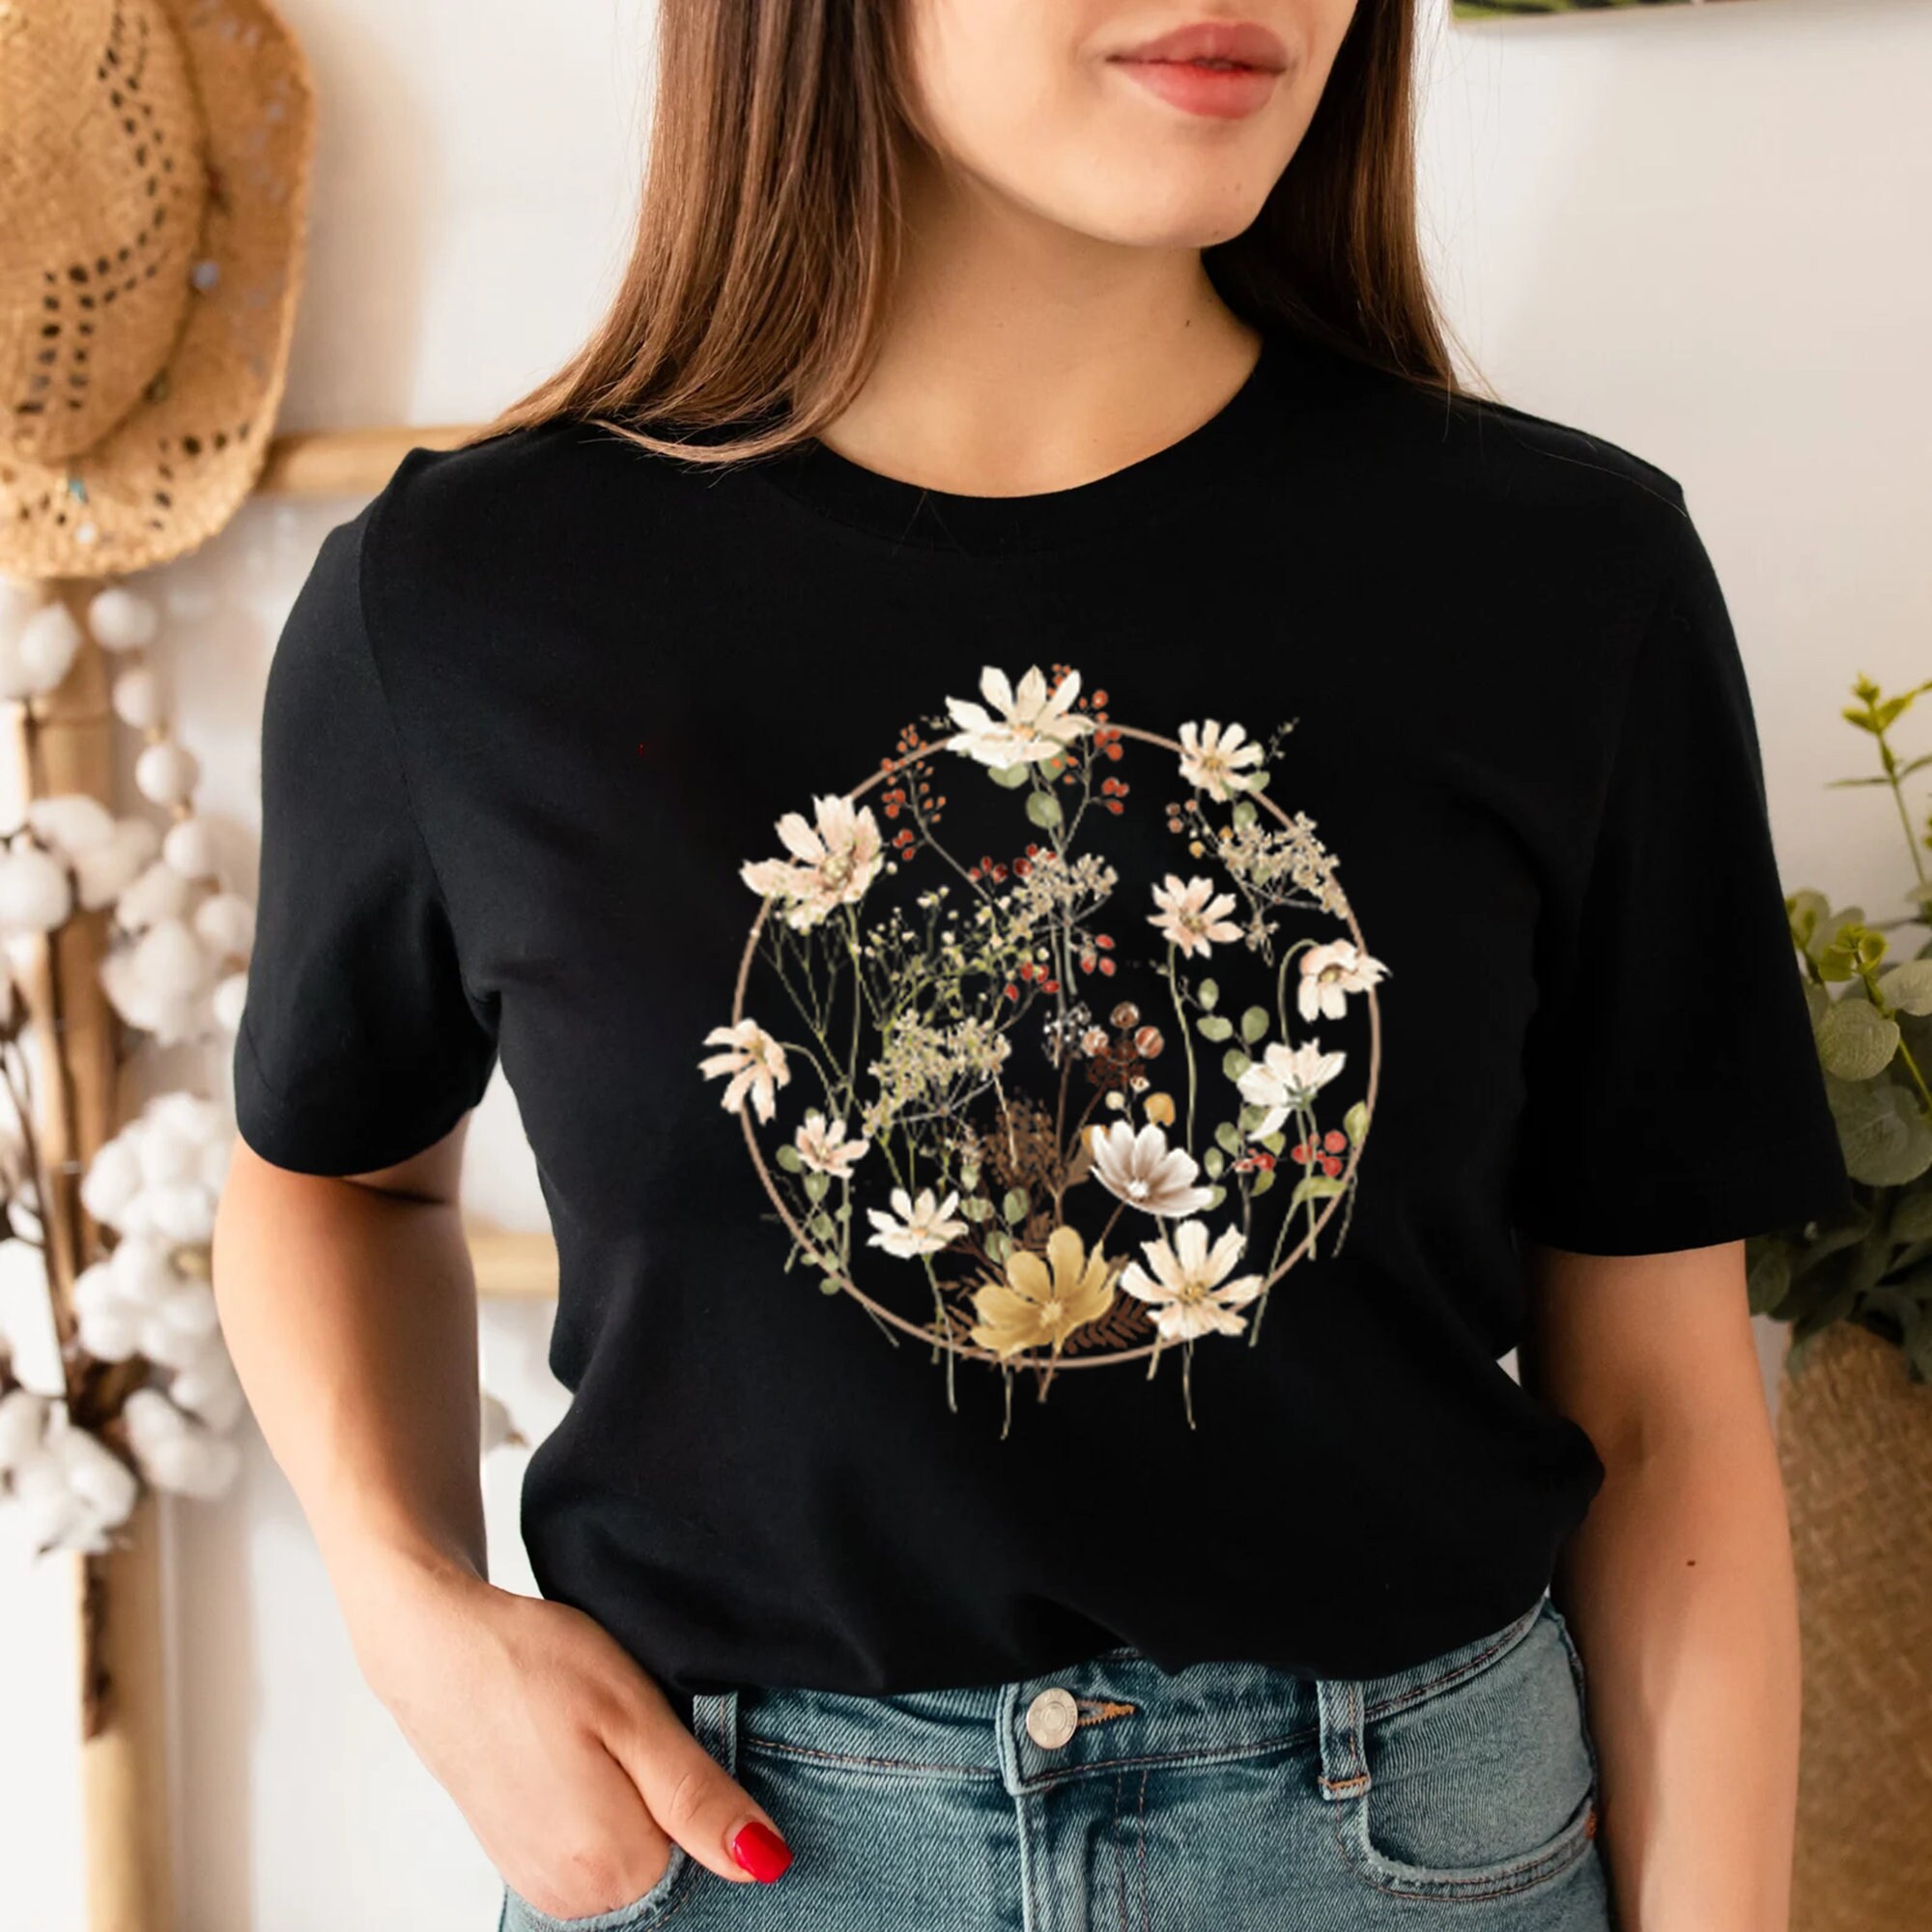 Discover Flower Shirt, Gift For Her, Flower Shirt Aesthetic, Floral Graphic Tee, Floral Shirt, Flower T-shirt, Wild Flower Shirt, Wildflower T-shirt